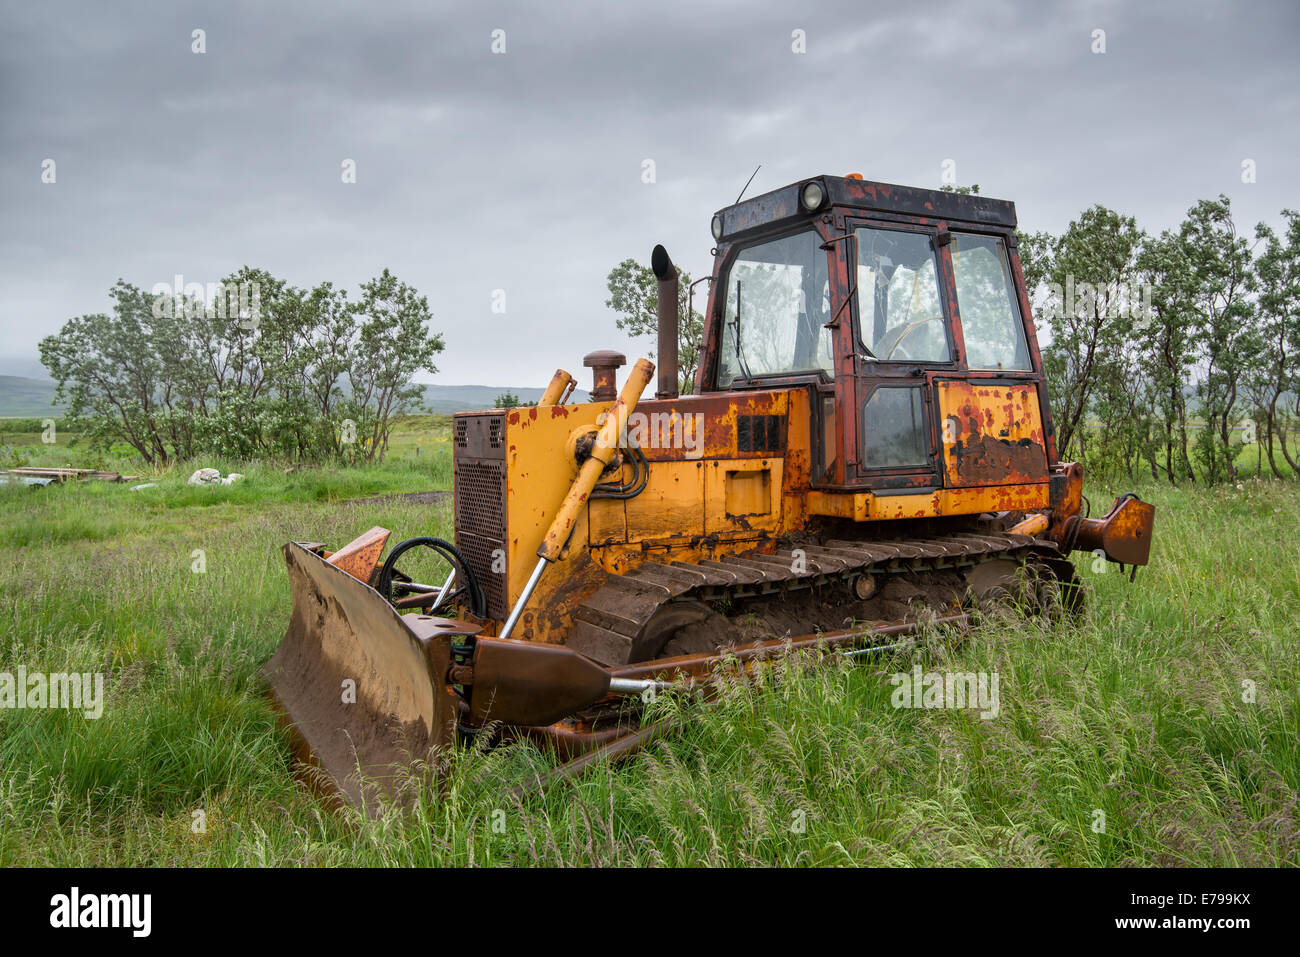 Old bulldozer abandoned in a grass field in a stormy day Stock Photo